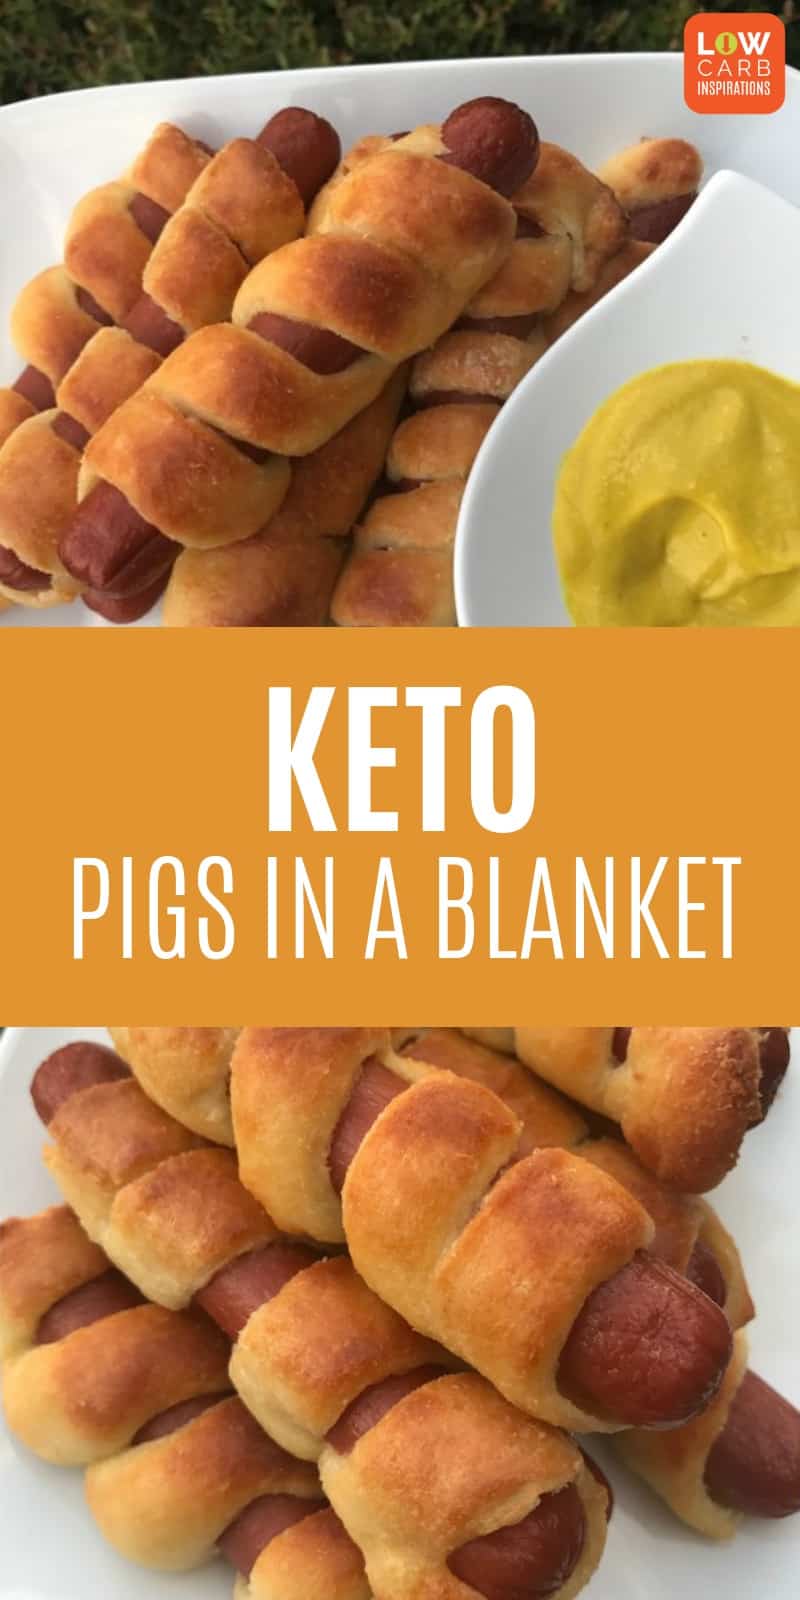 This keto pigs in a blanket recipe made with fat head dough is perfect for a weeknight meal or when you need to get dinner on the table in a hurry! It's really easy to make and tastes delicious too!